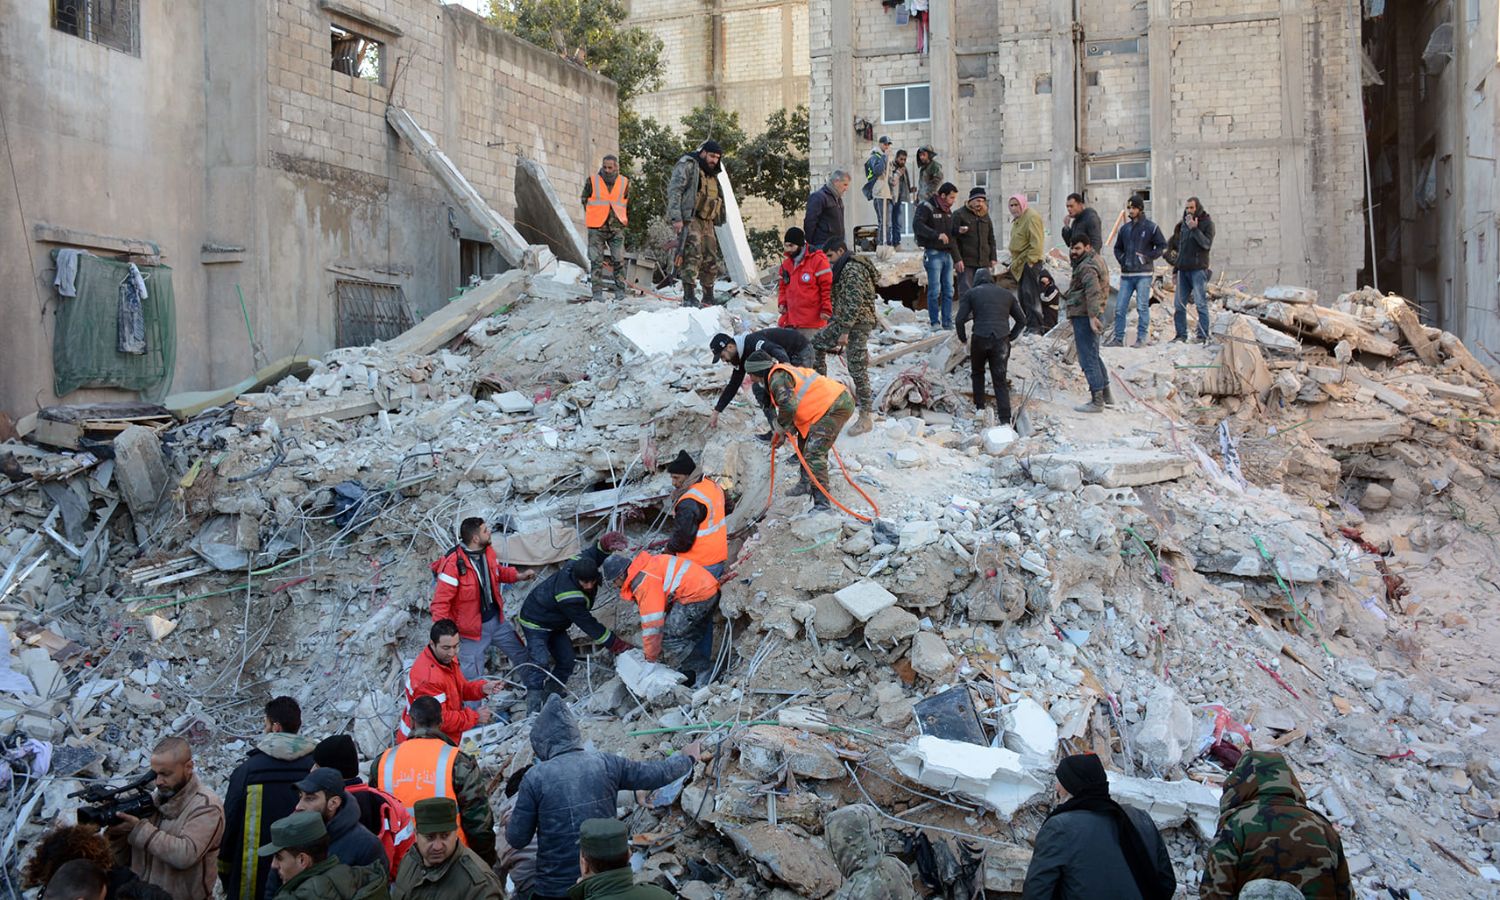 Search operations for survivors trapped under the rubble following the earthquake in Latakia - February 8, 2023 (Latakia Governorate Media Office)